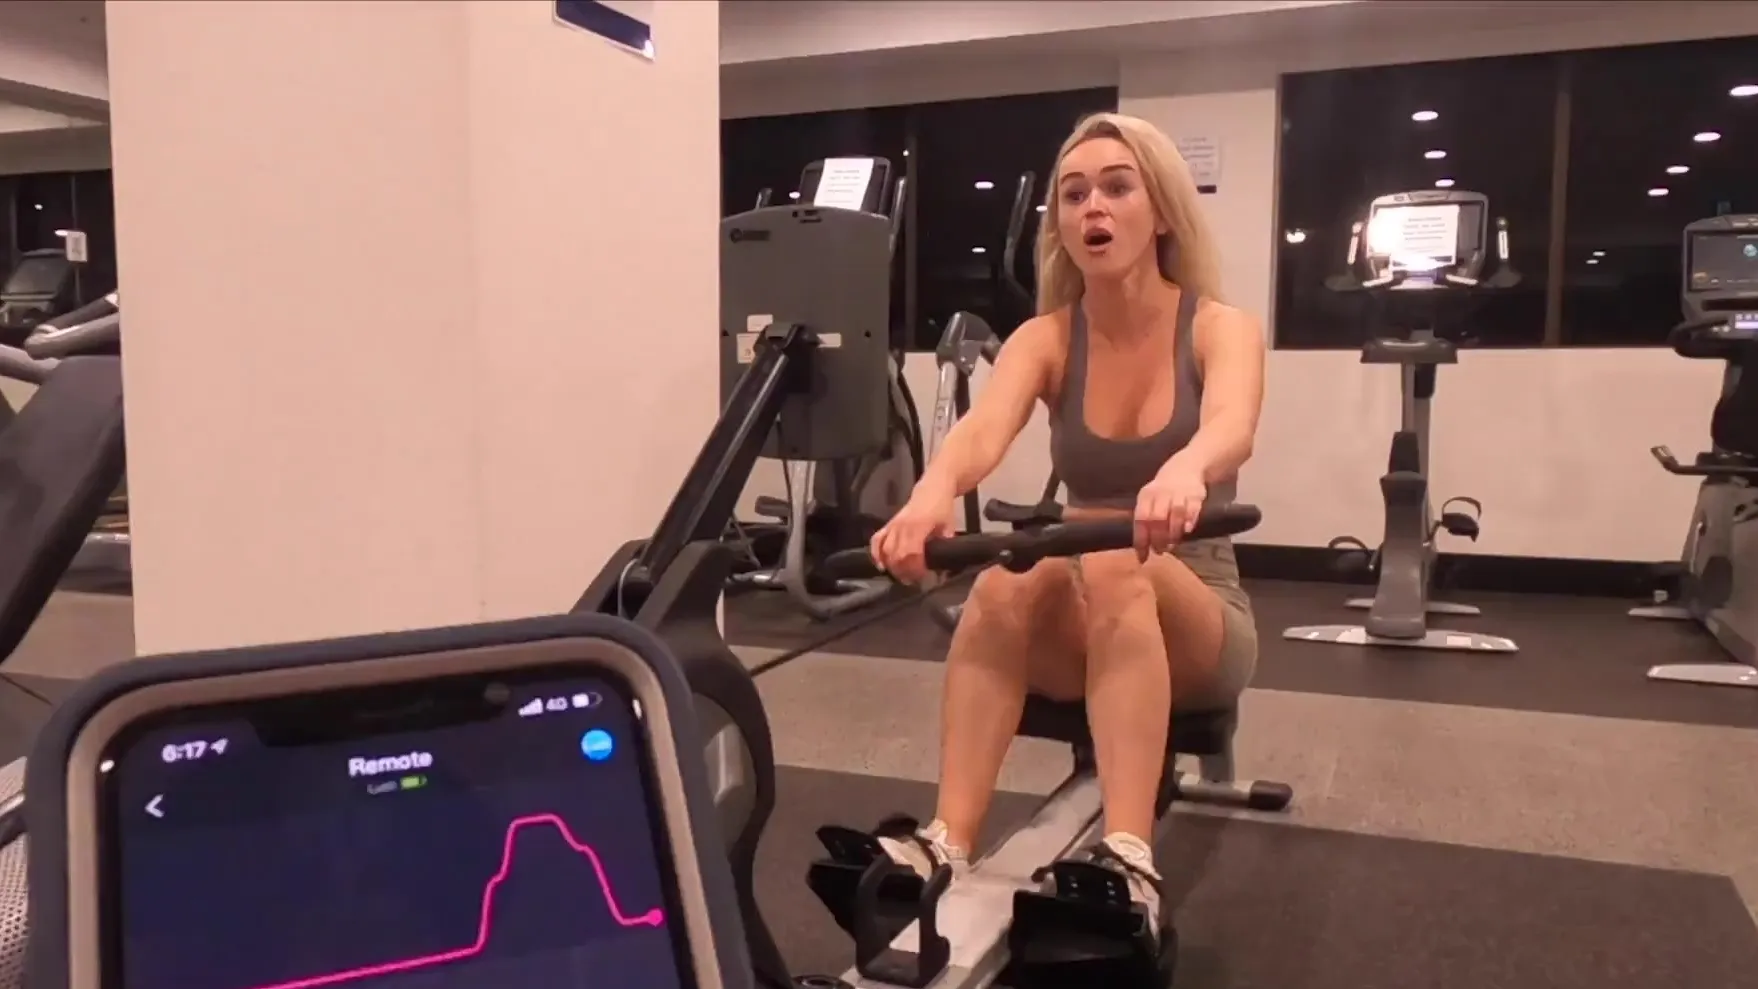 Gym Hidden Sex - Hidden vibrator in her pussy and work out at gym